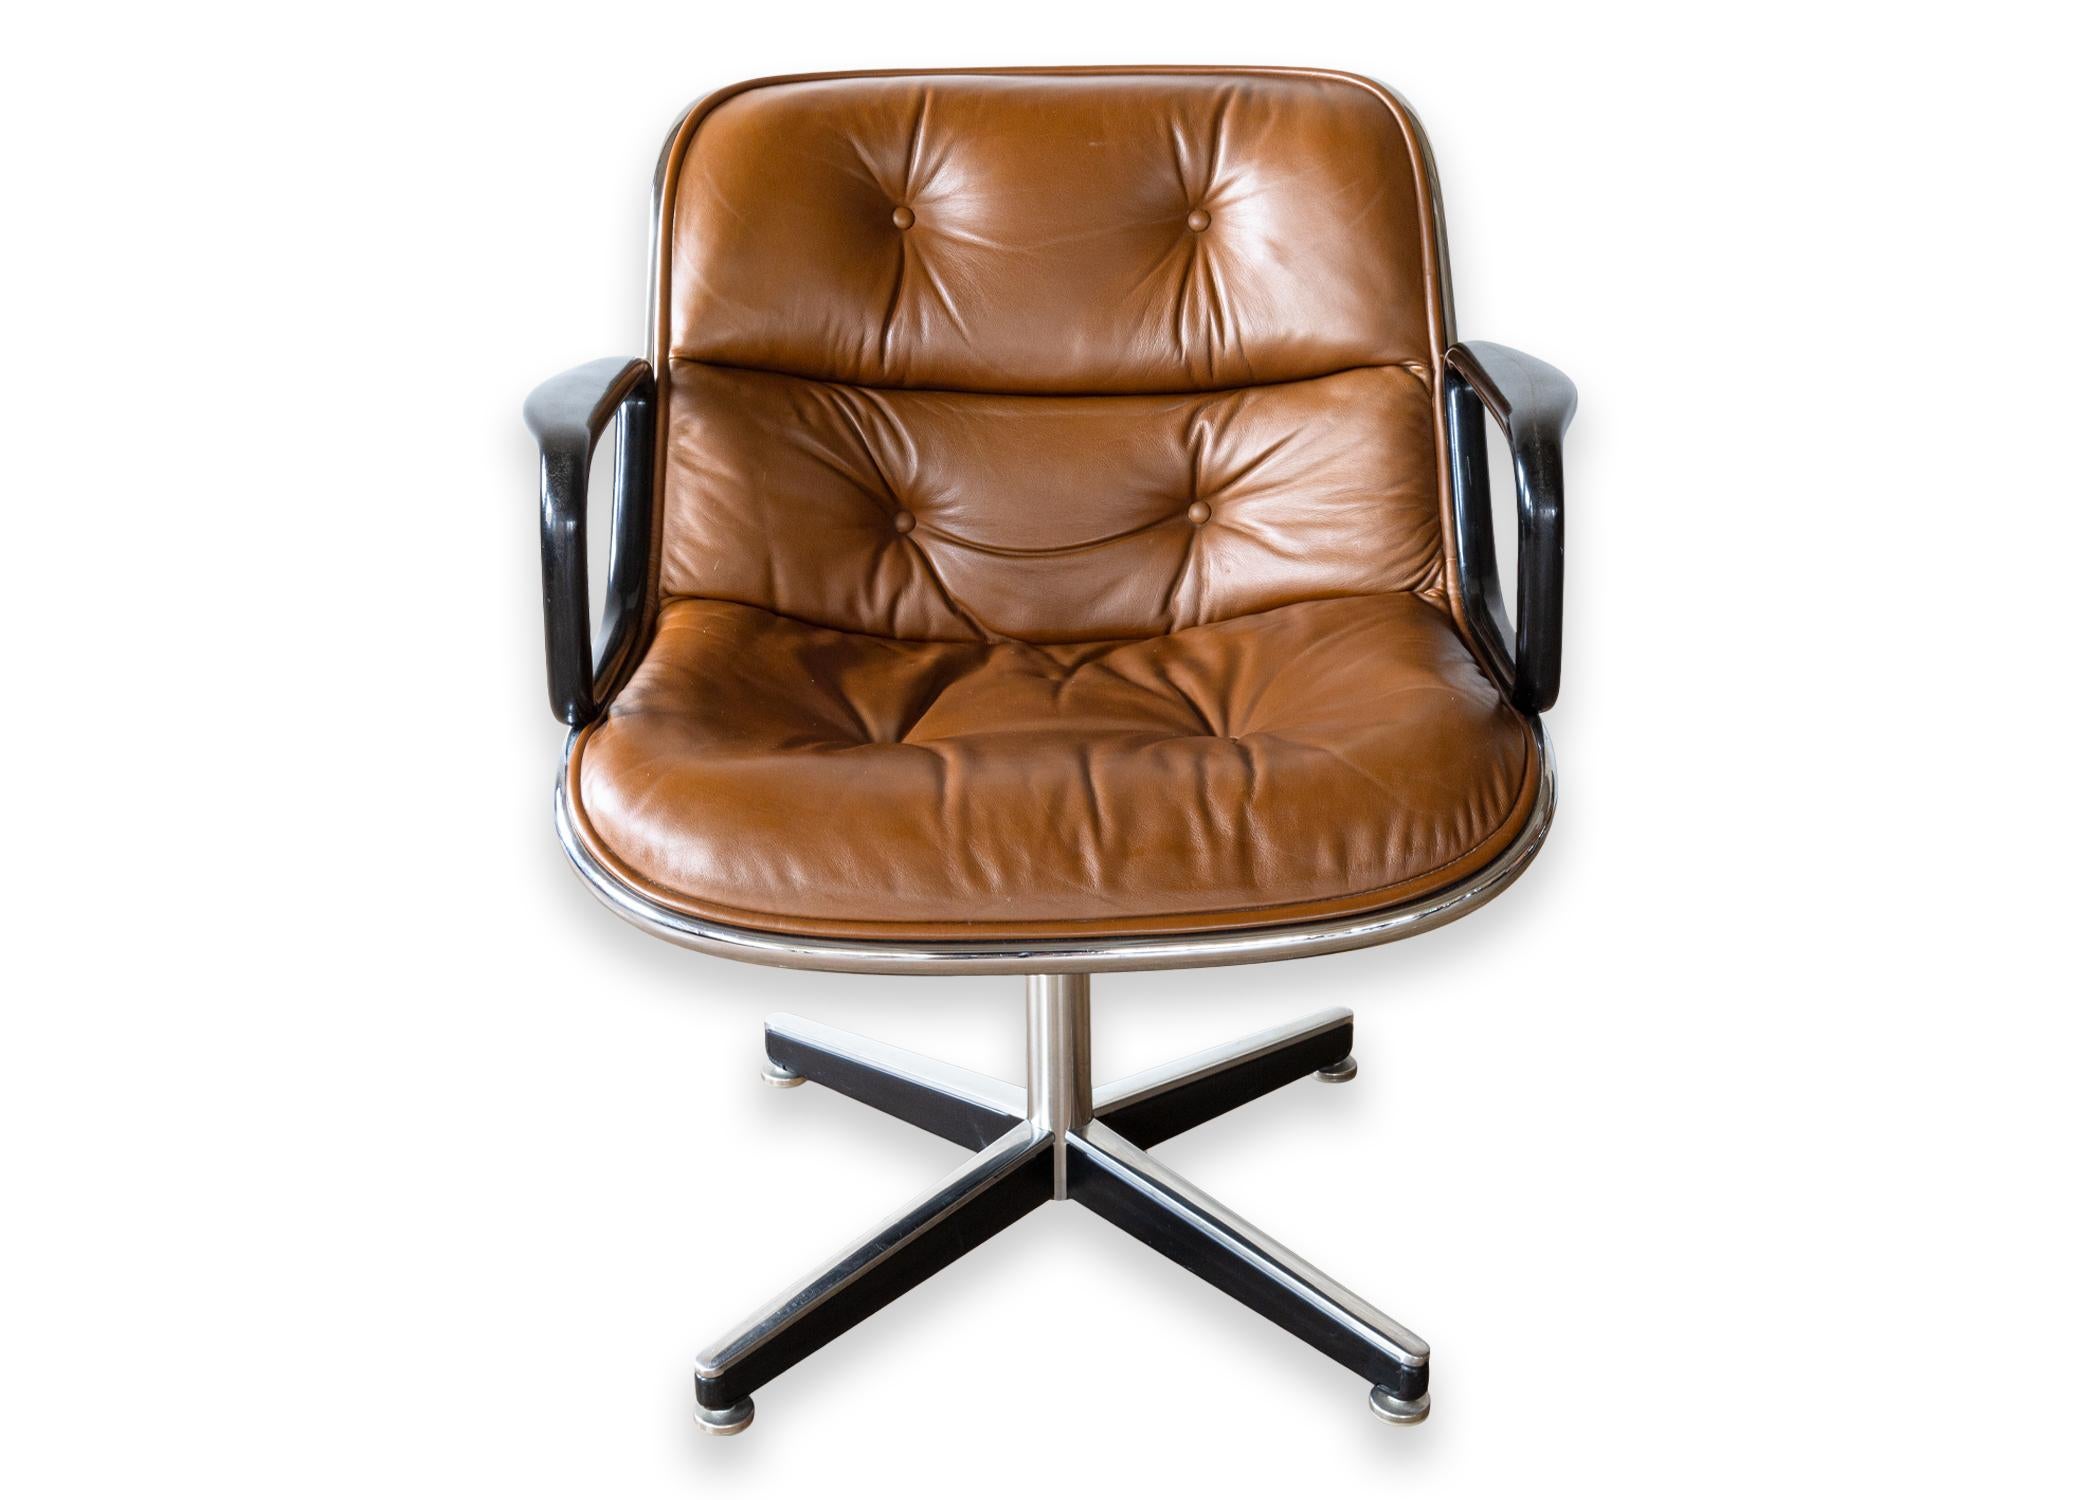 A pair of executive chairs from Knoll. A gorgeous set of Charles Pollock chairs featuring a rich brown leather upholstery. These chairs are in fantastic condition. They look gorgeous, and sit incredibly comfortable. Each chair features the iconic